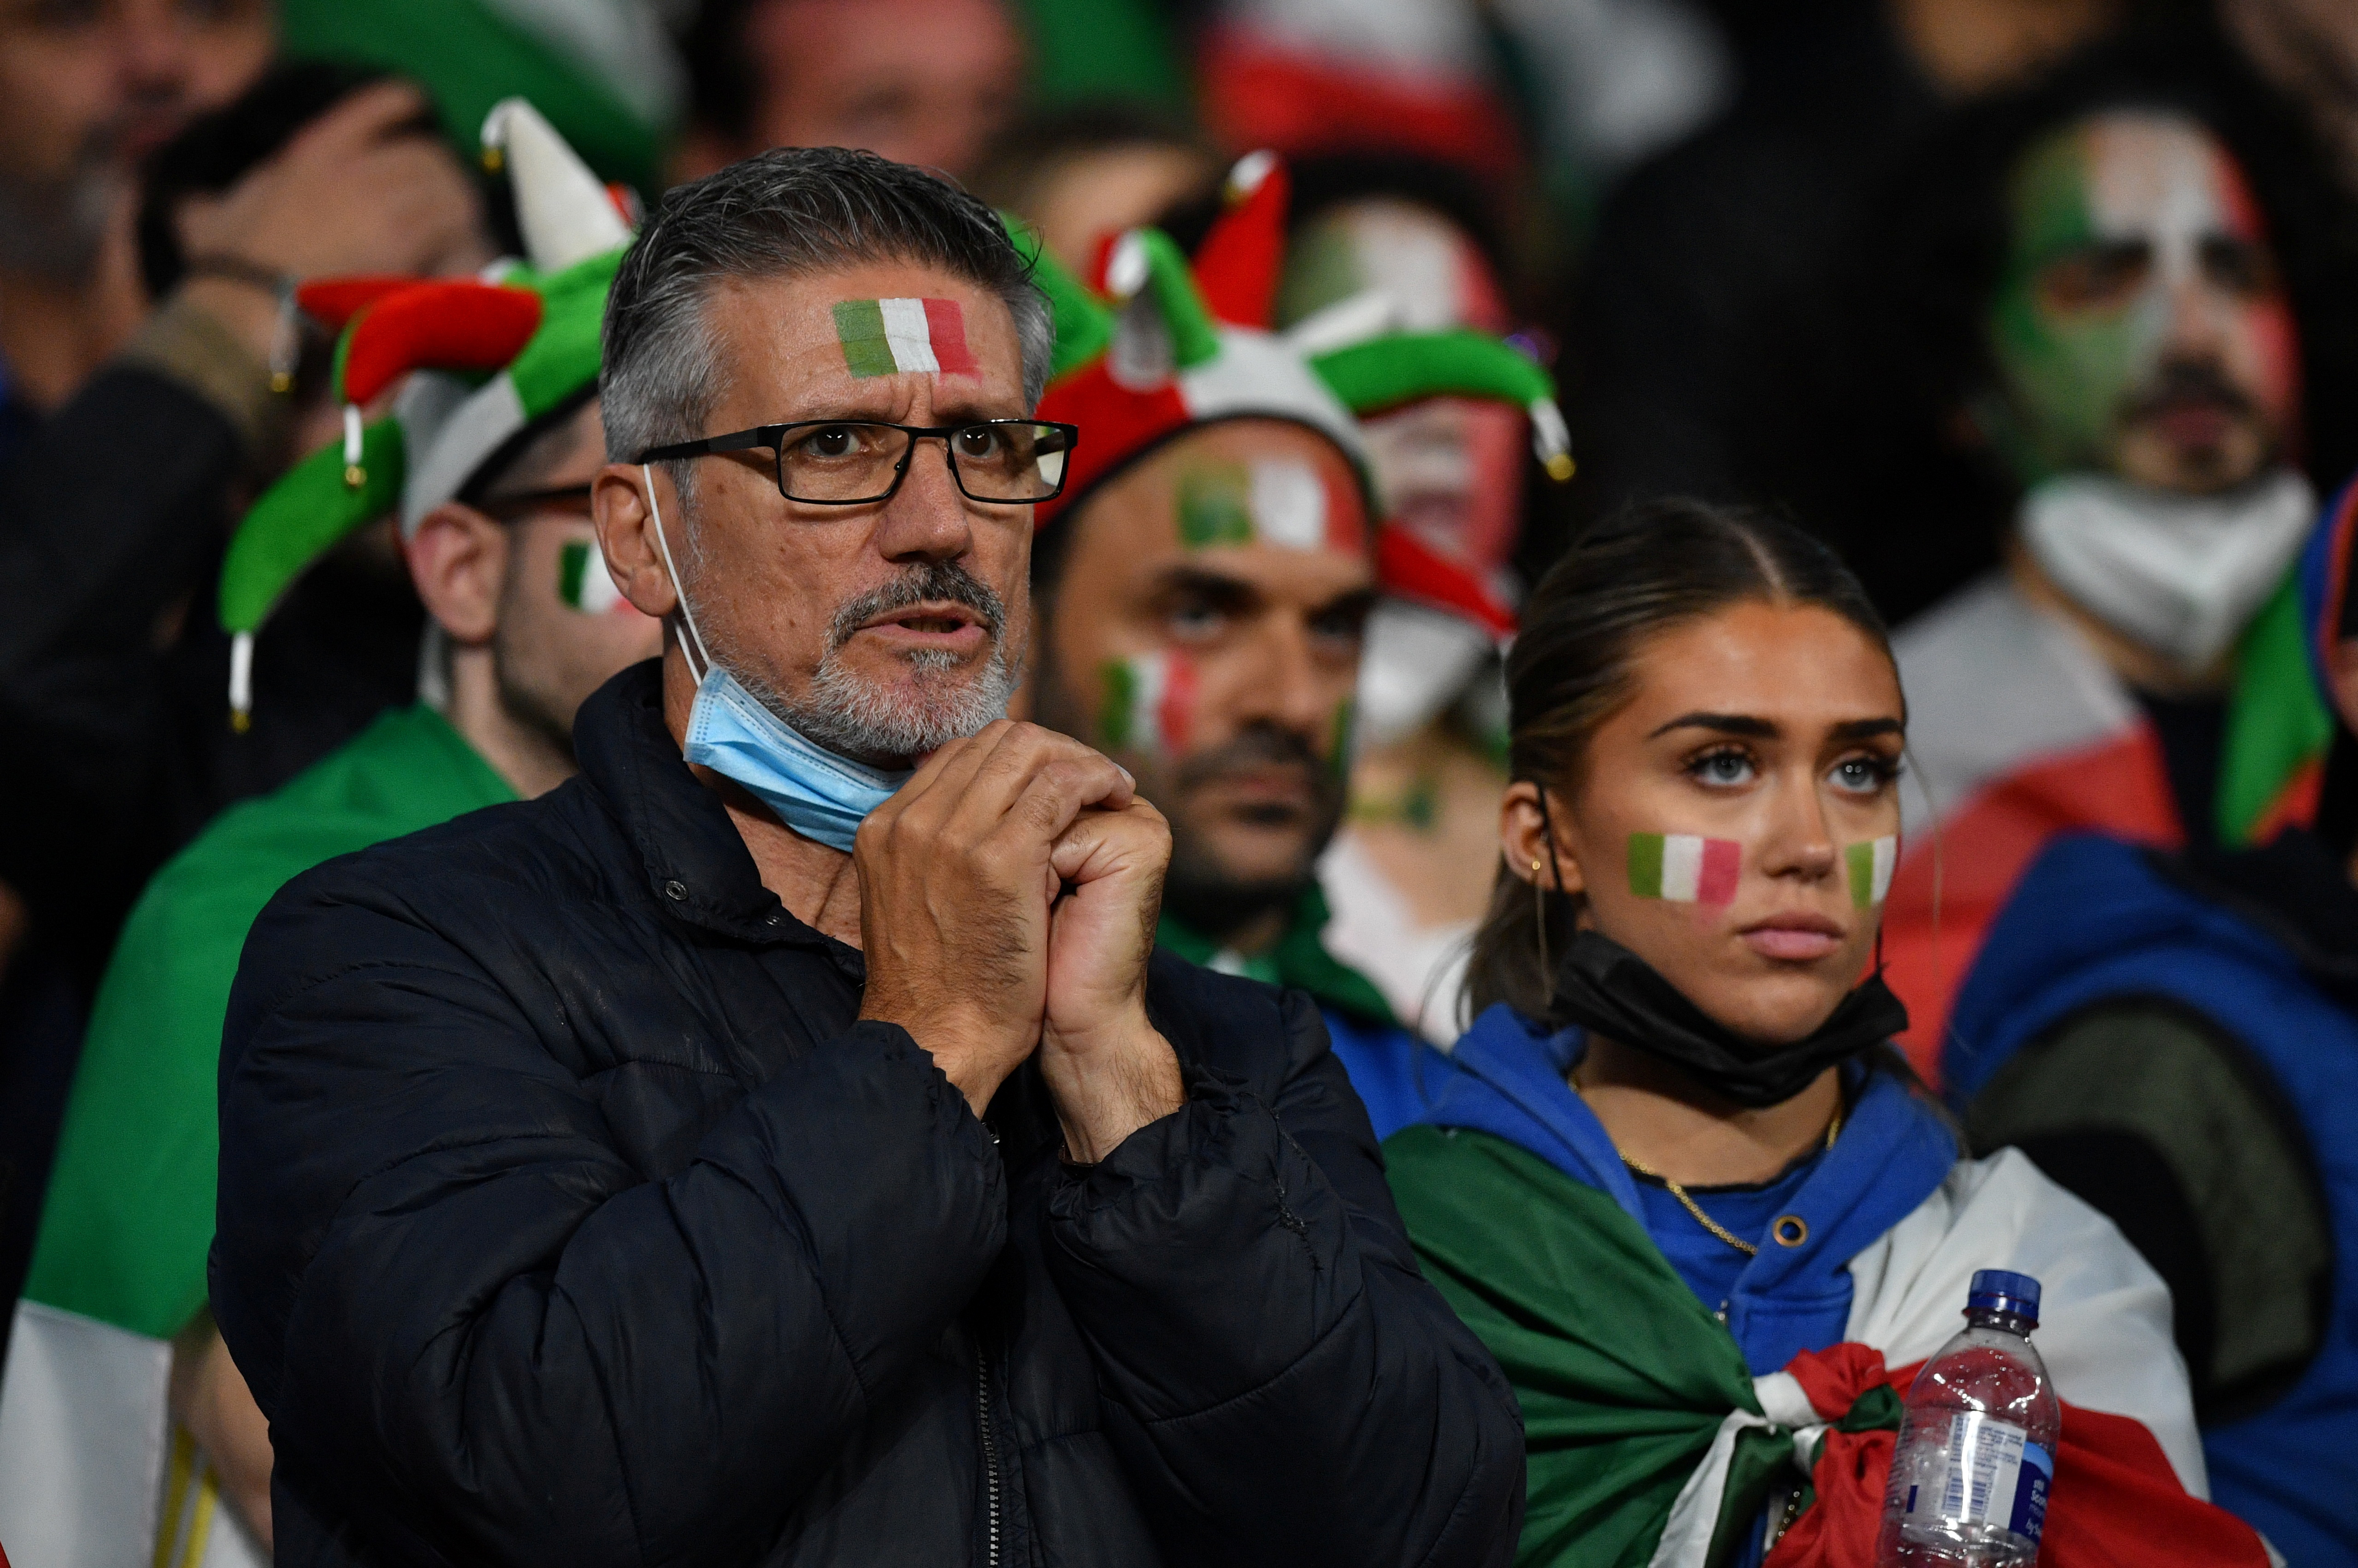 Up to Italy fans to be flown to London for 2020 | Reuters